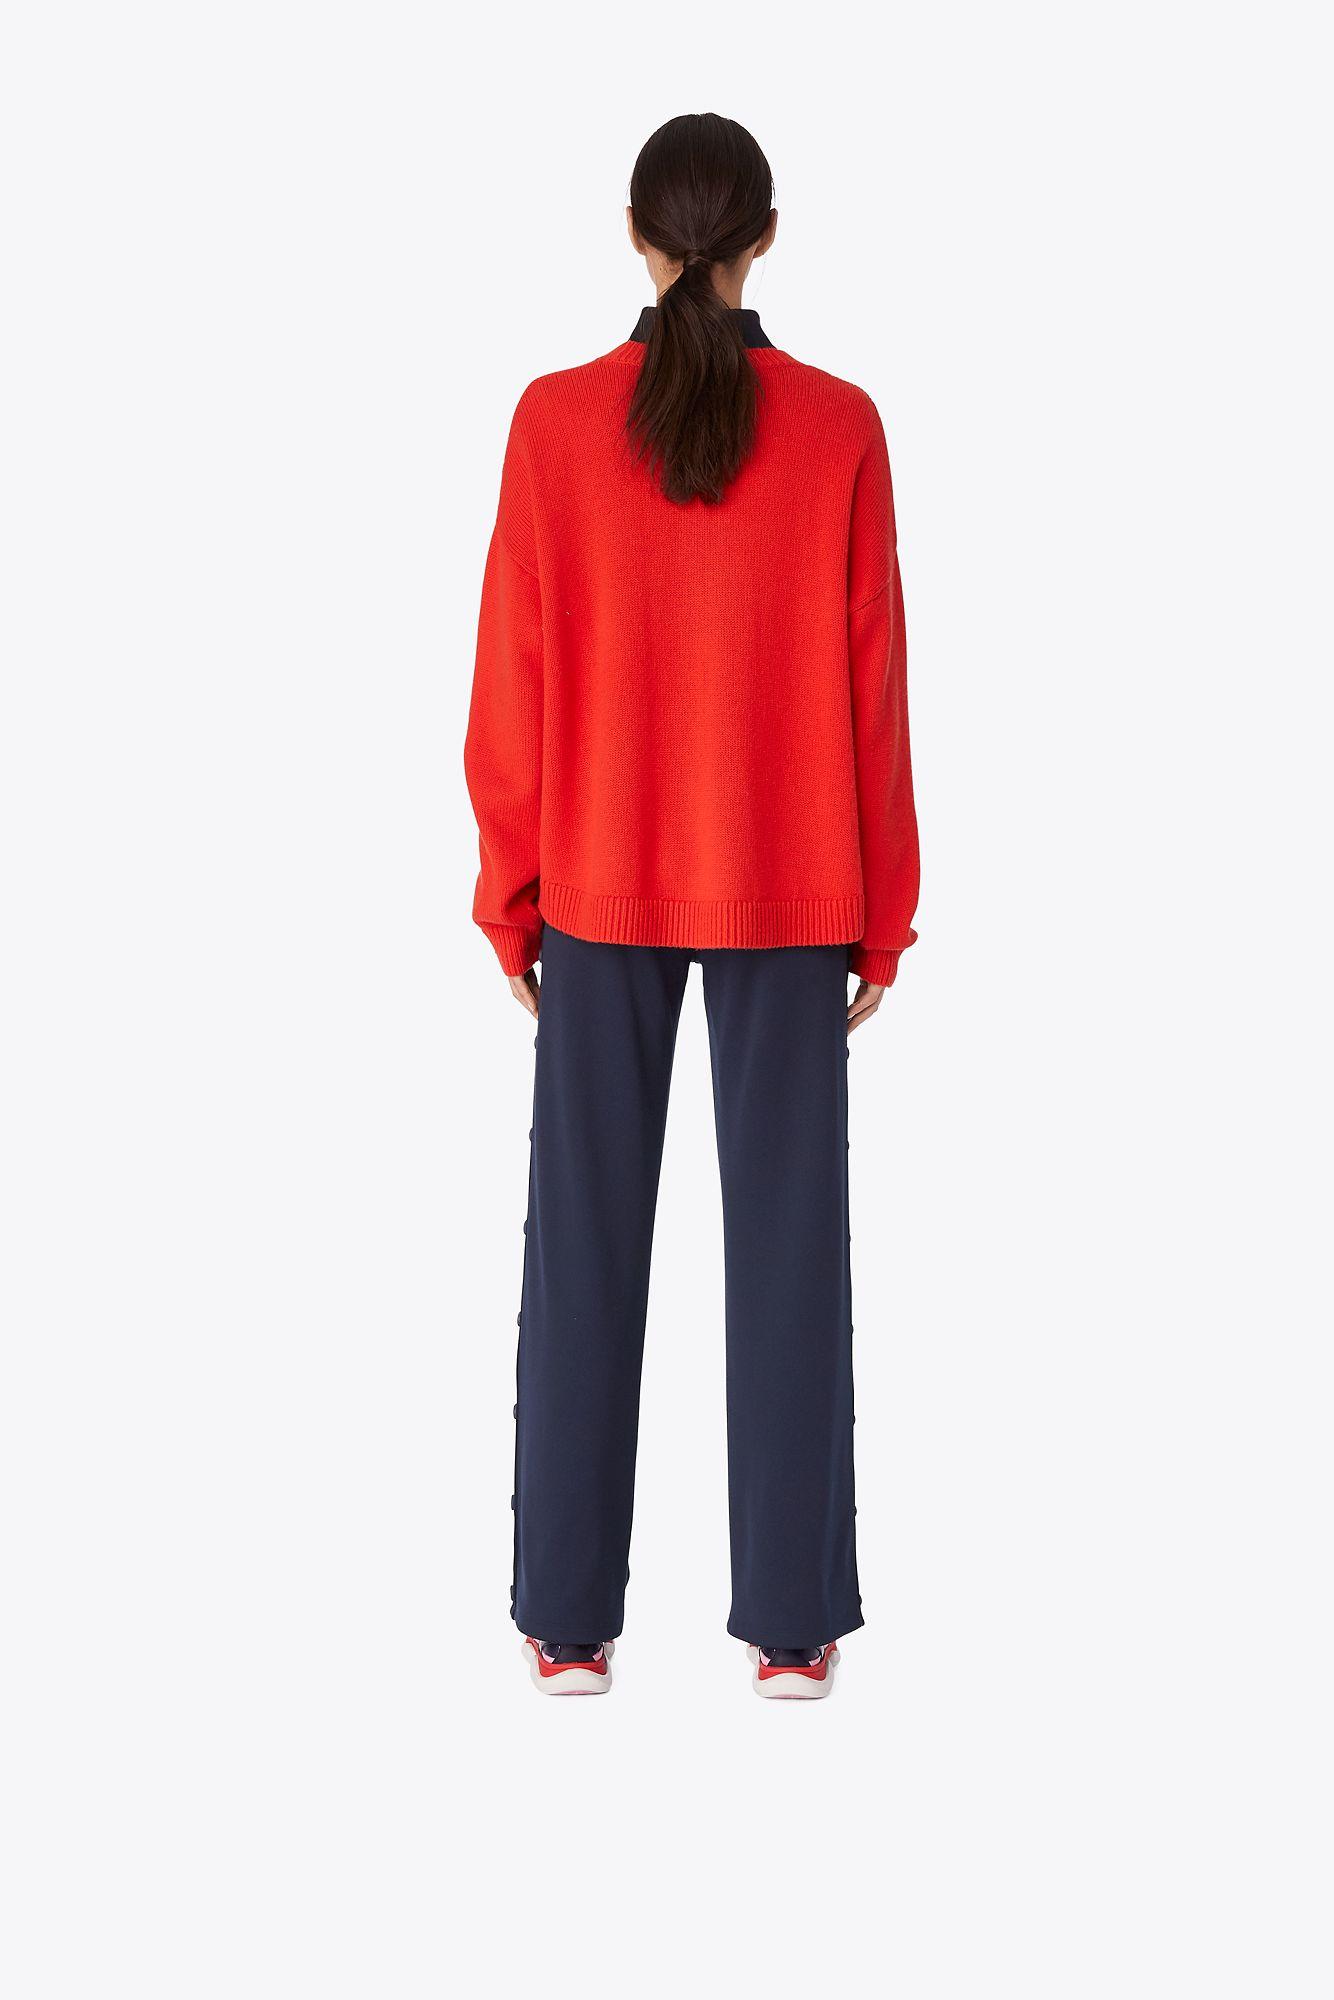 Tory Sport Performance Cashmere Love Sweater in Red - Lyst